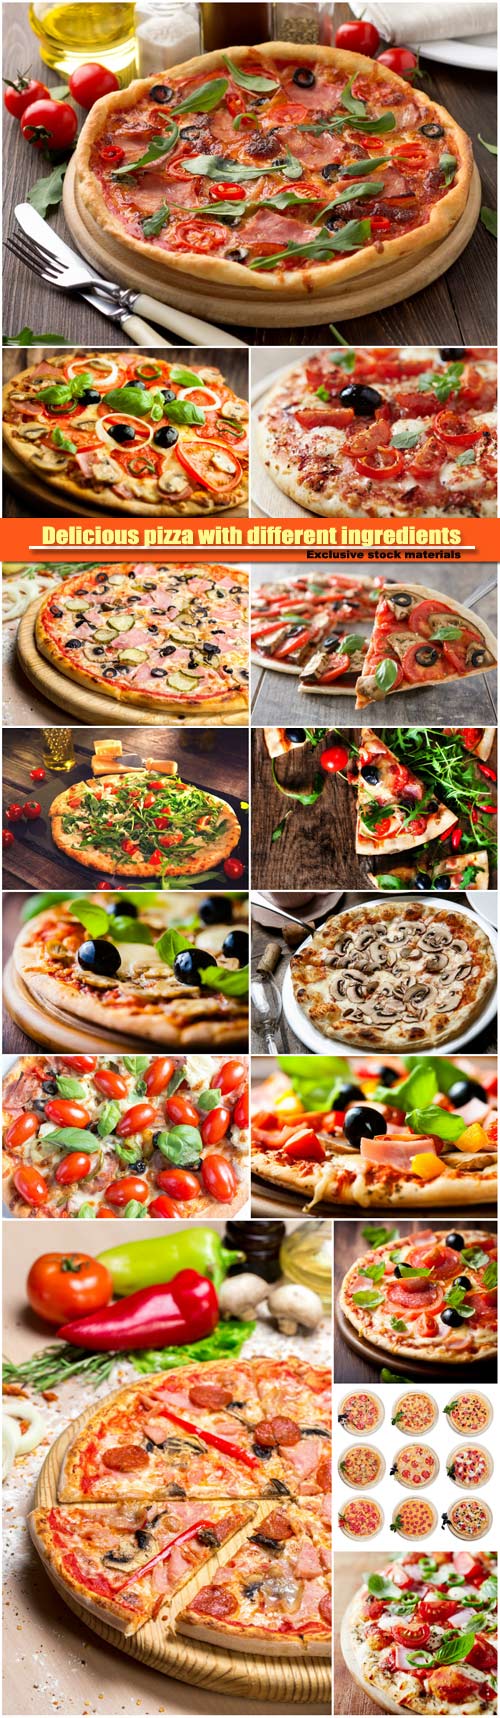 Delicious pizza with different ingredients